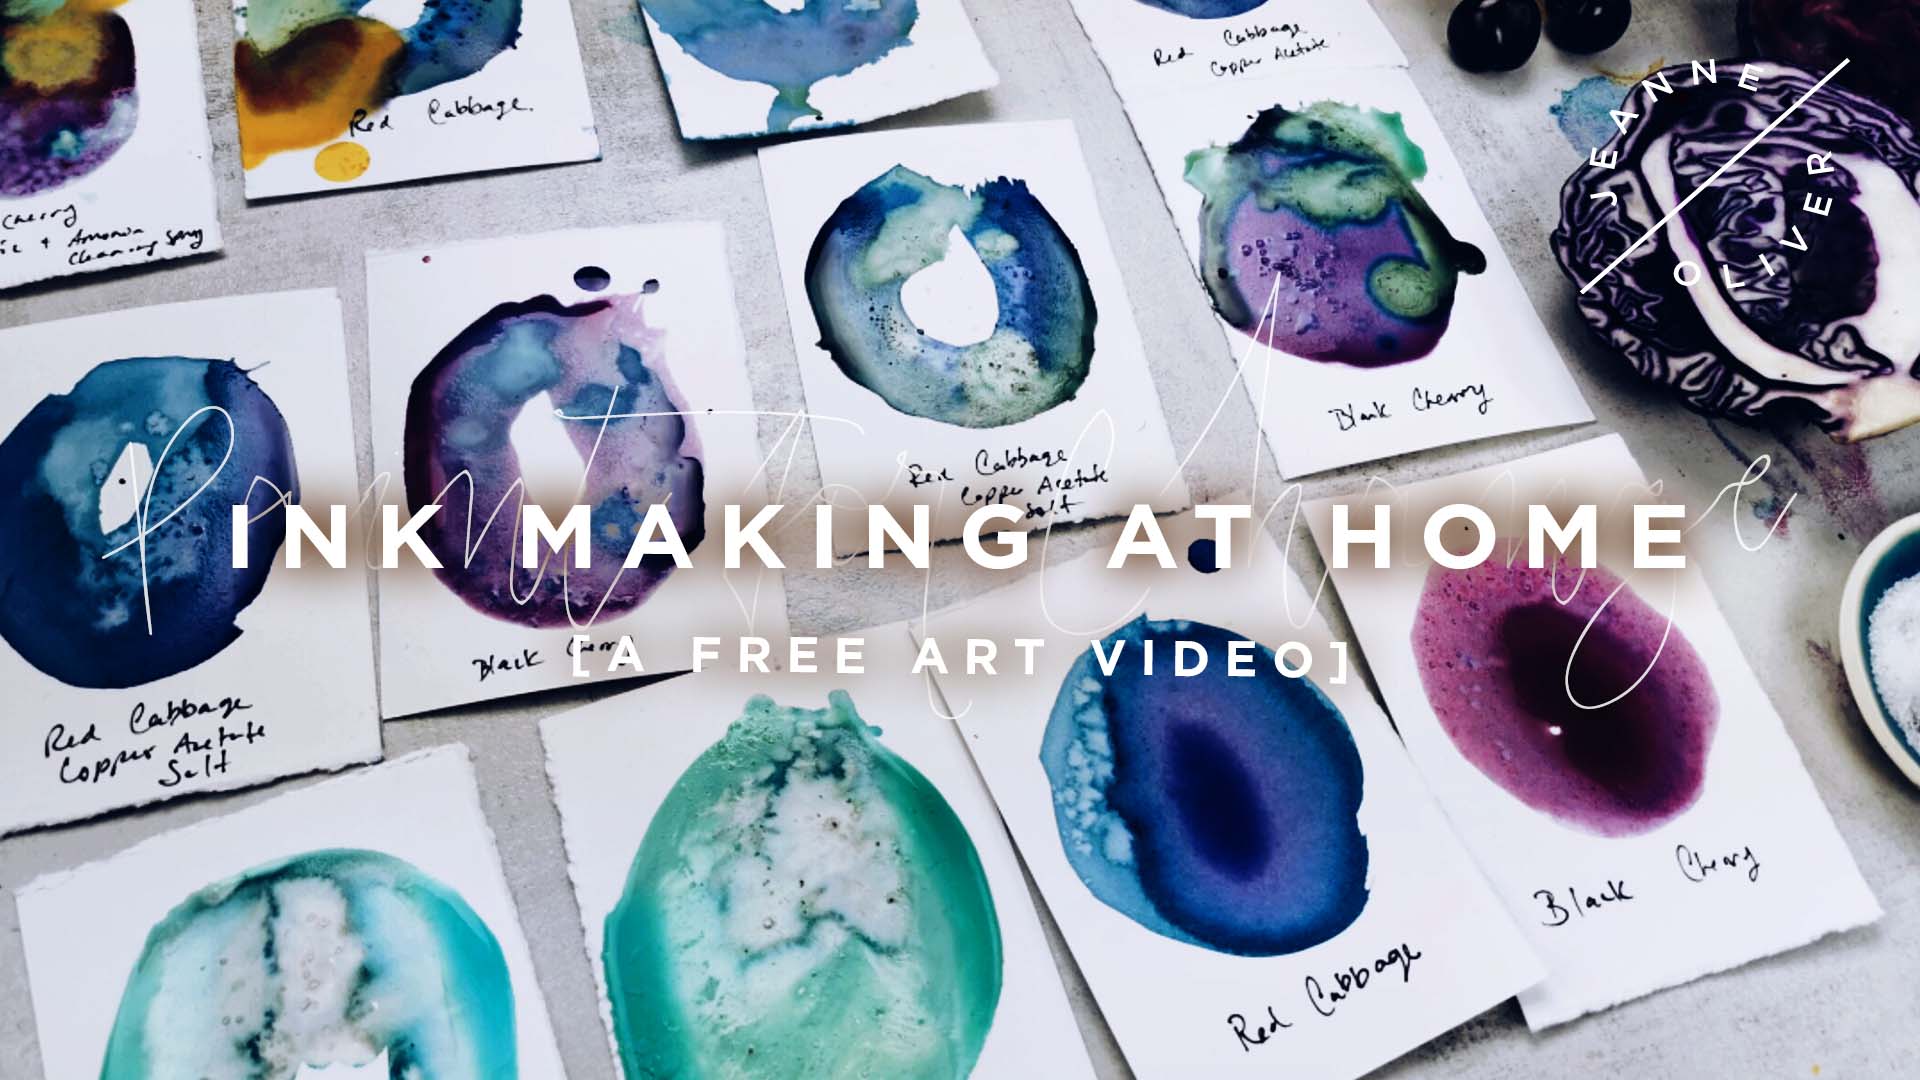 Free Art Video: Ink Making at Home